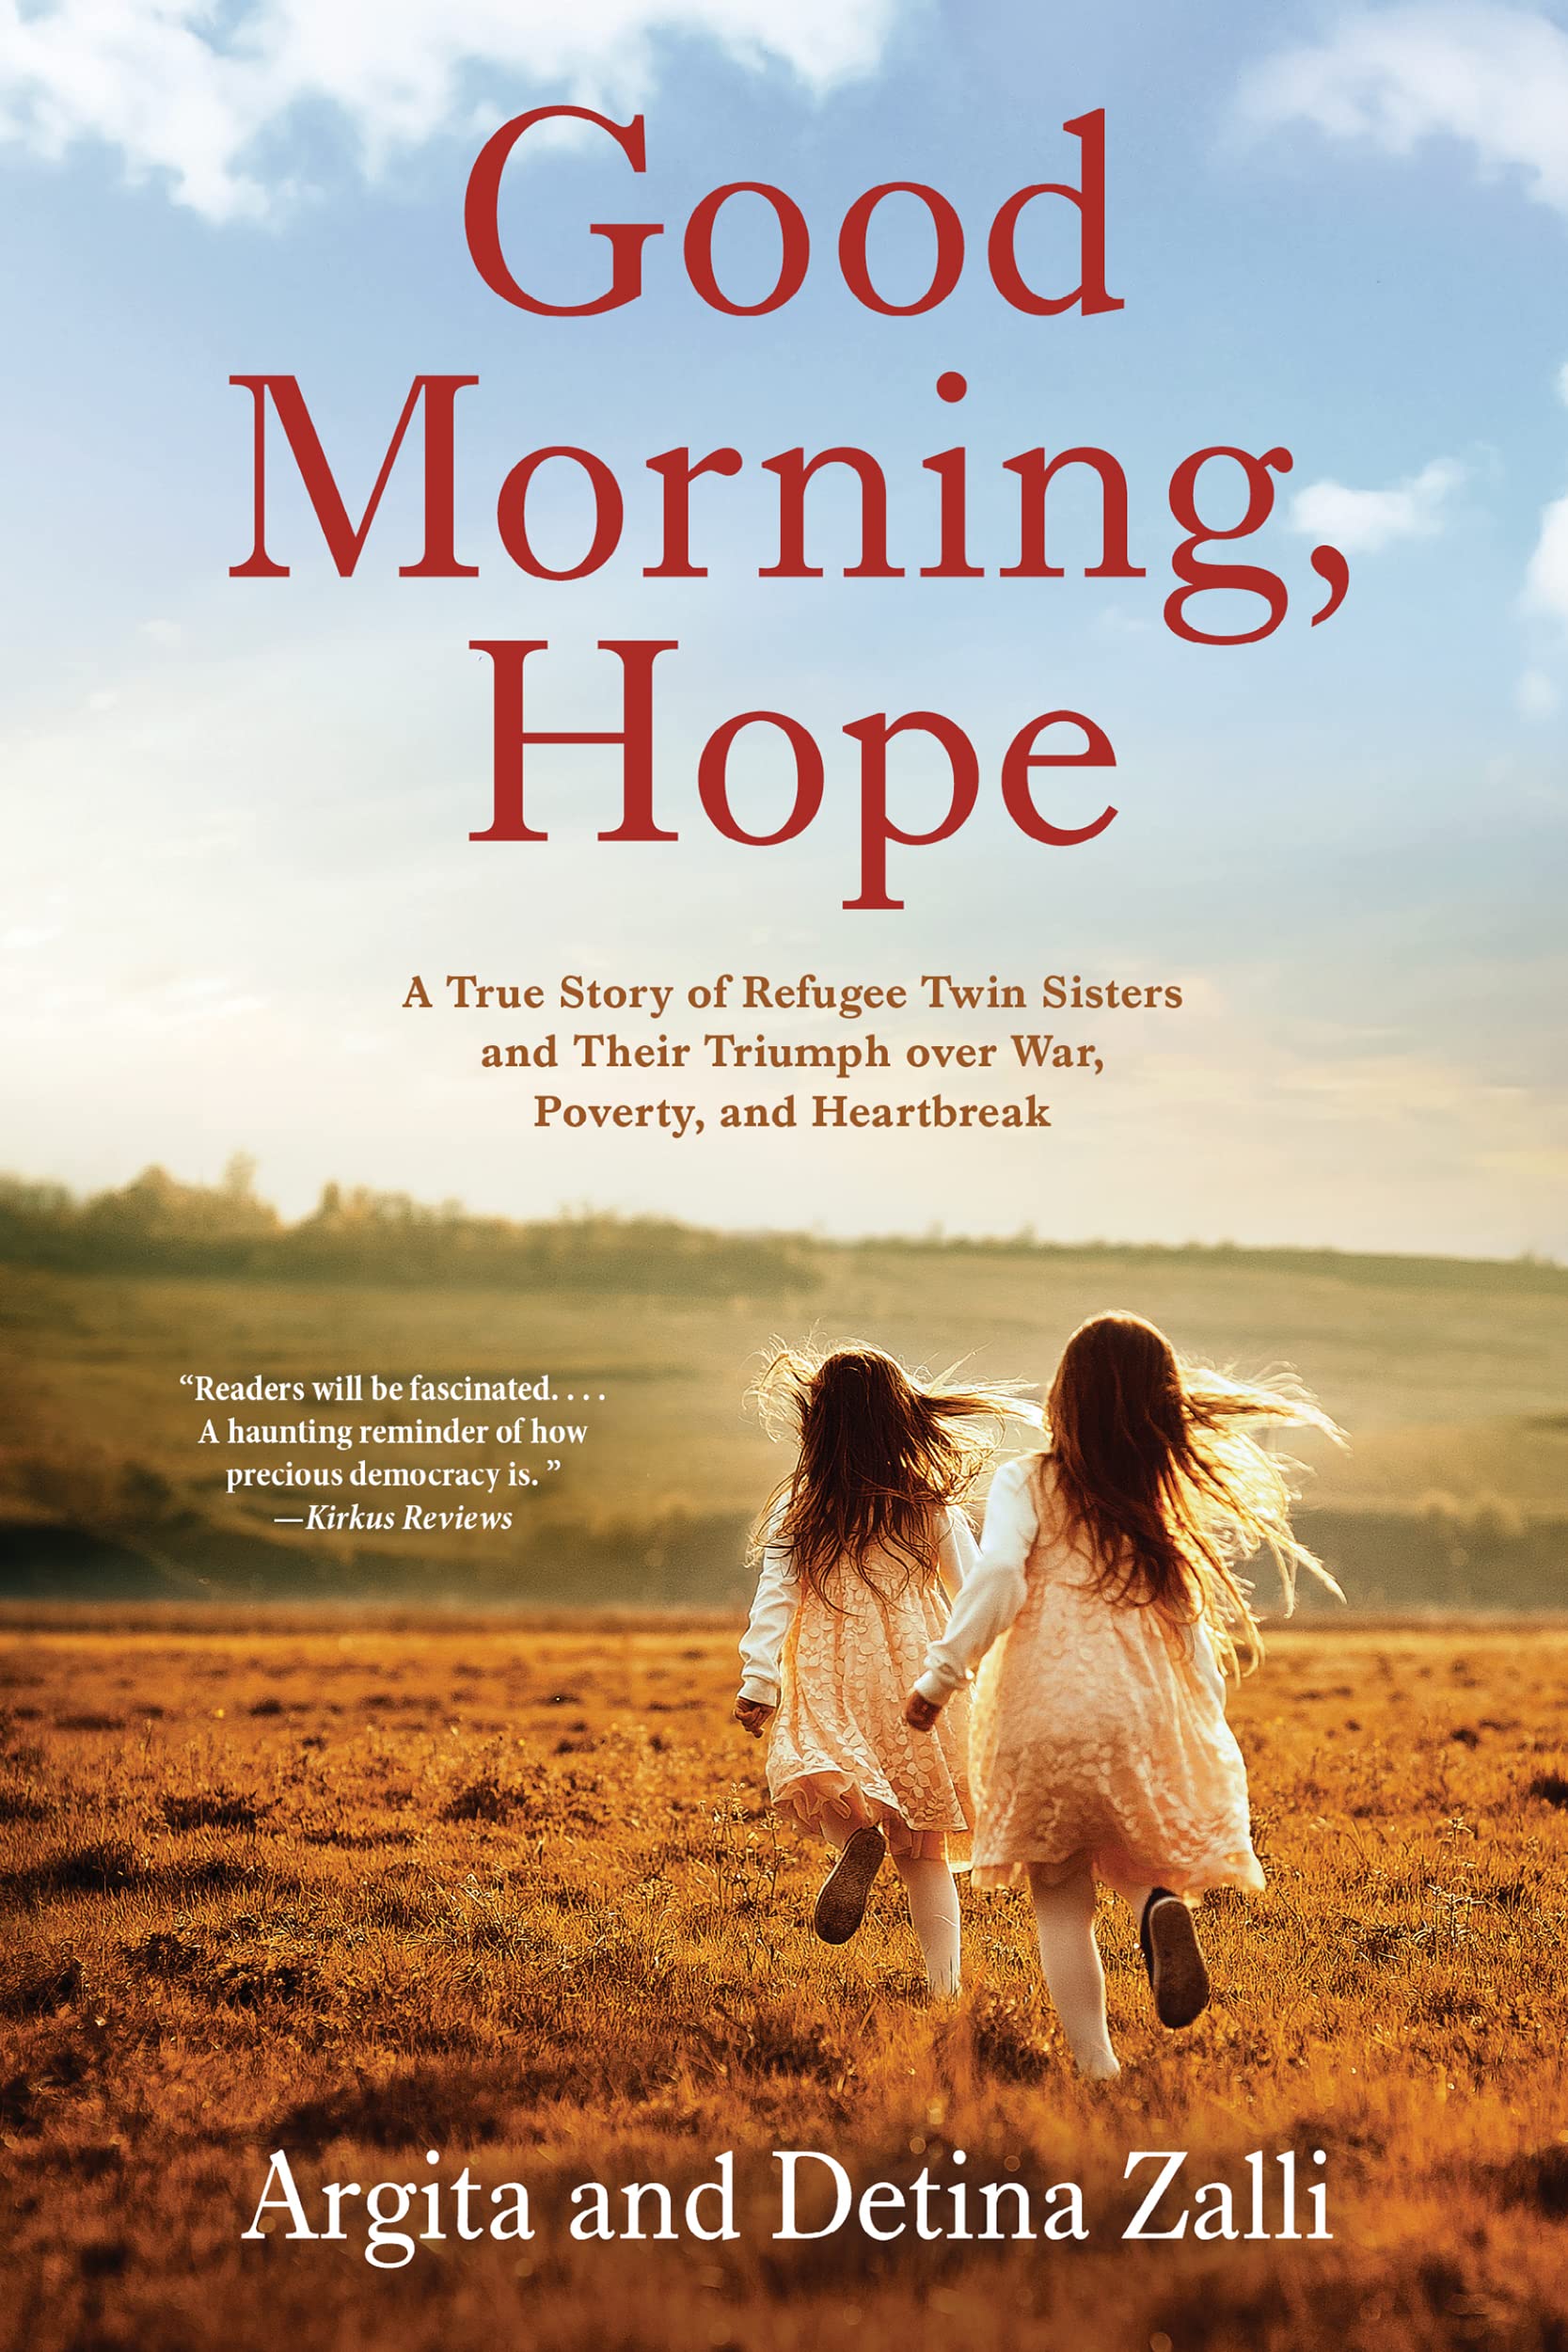 Good Morning, Hope: A True Story of Refugee Twin Sisters and Their Triumph over War, Poverty, and Heartbreak